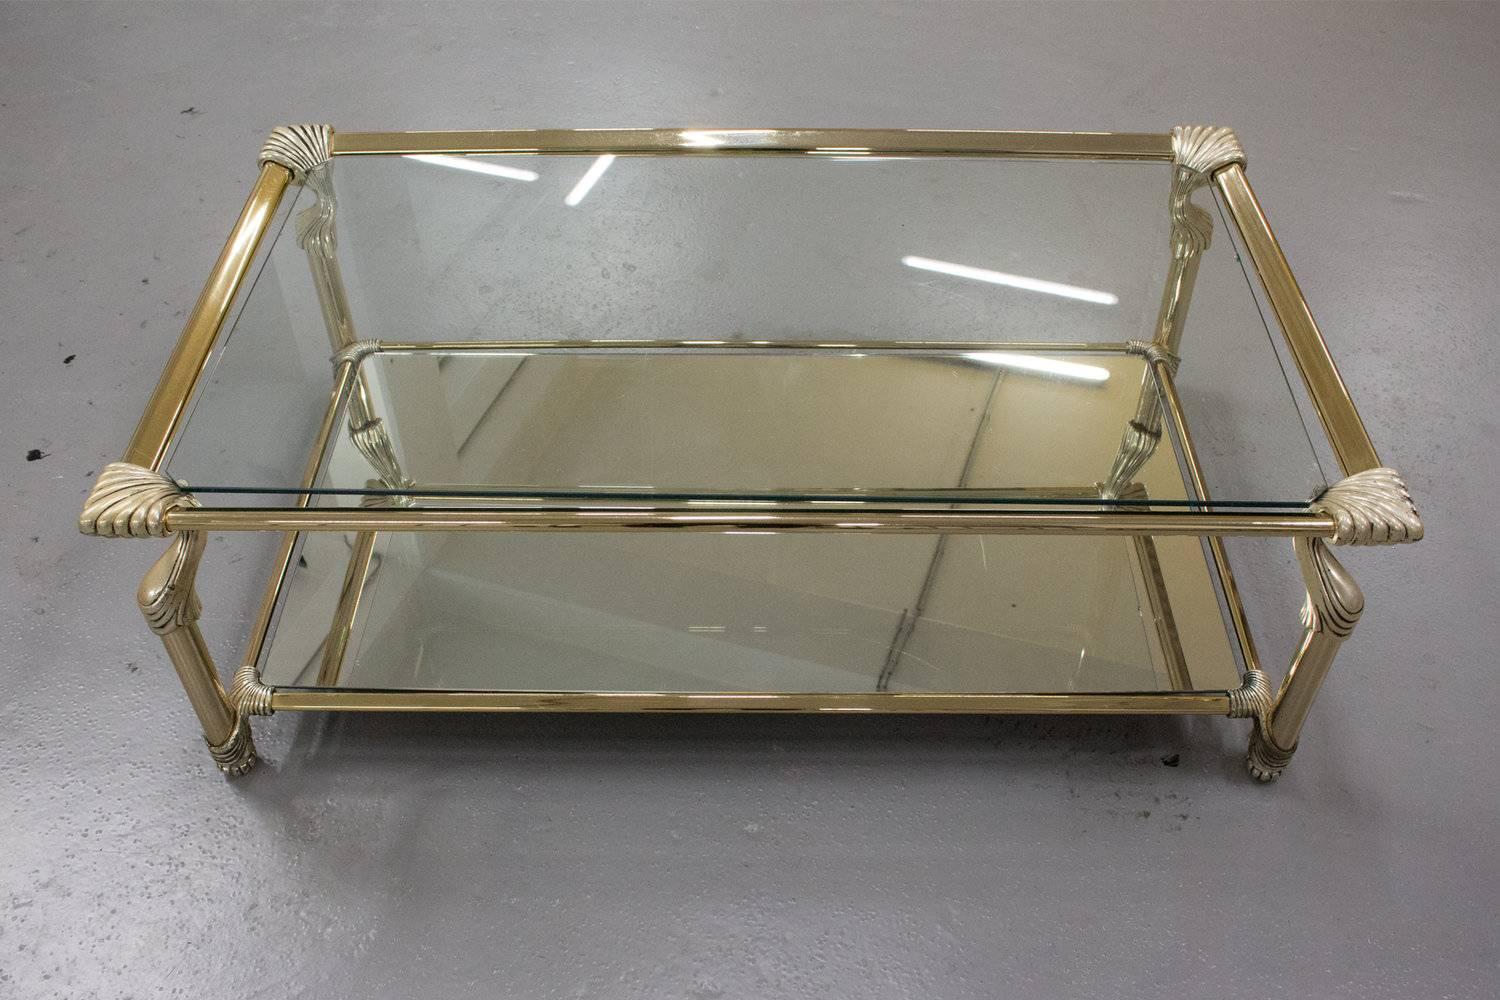 Spanish-designed Muebles Curvasa coffee table with a brass frame and glass and mirror inlay. The table is signed on each corner. Presumably the table dates back from the 1970s. The legs of the table feature detailed carvings, which gives the table a